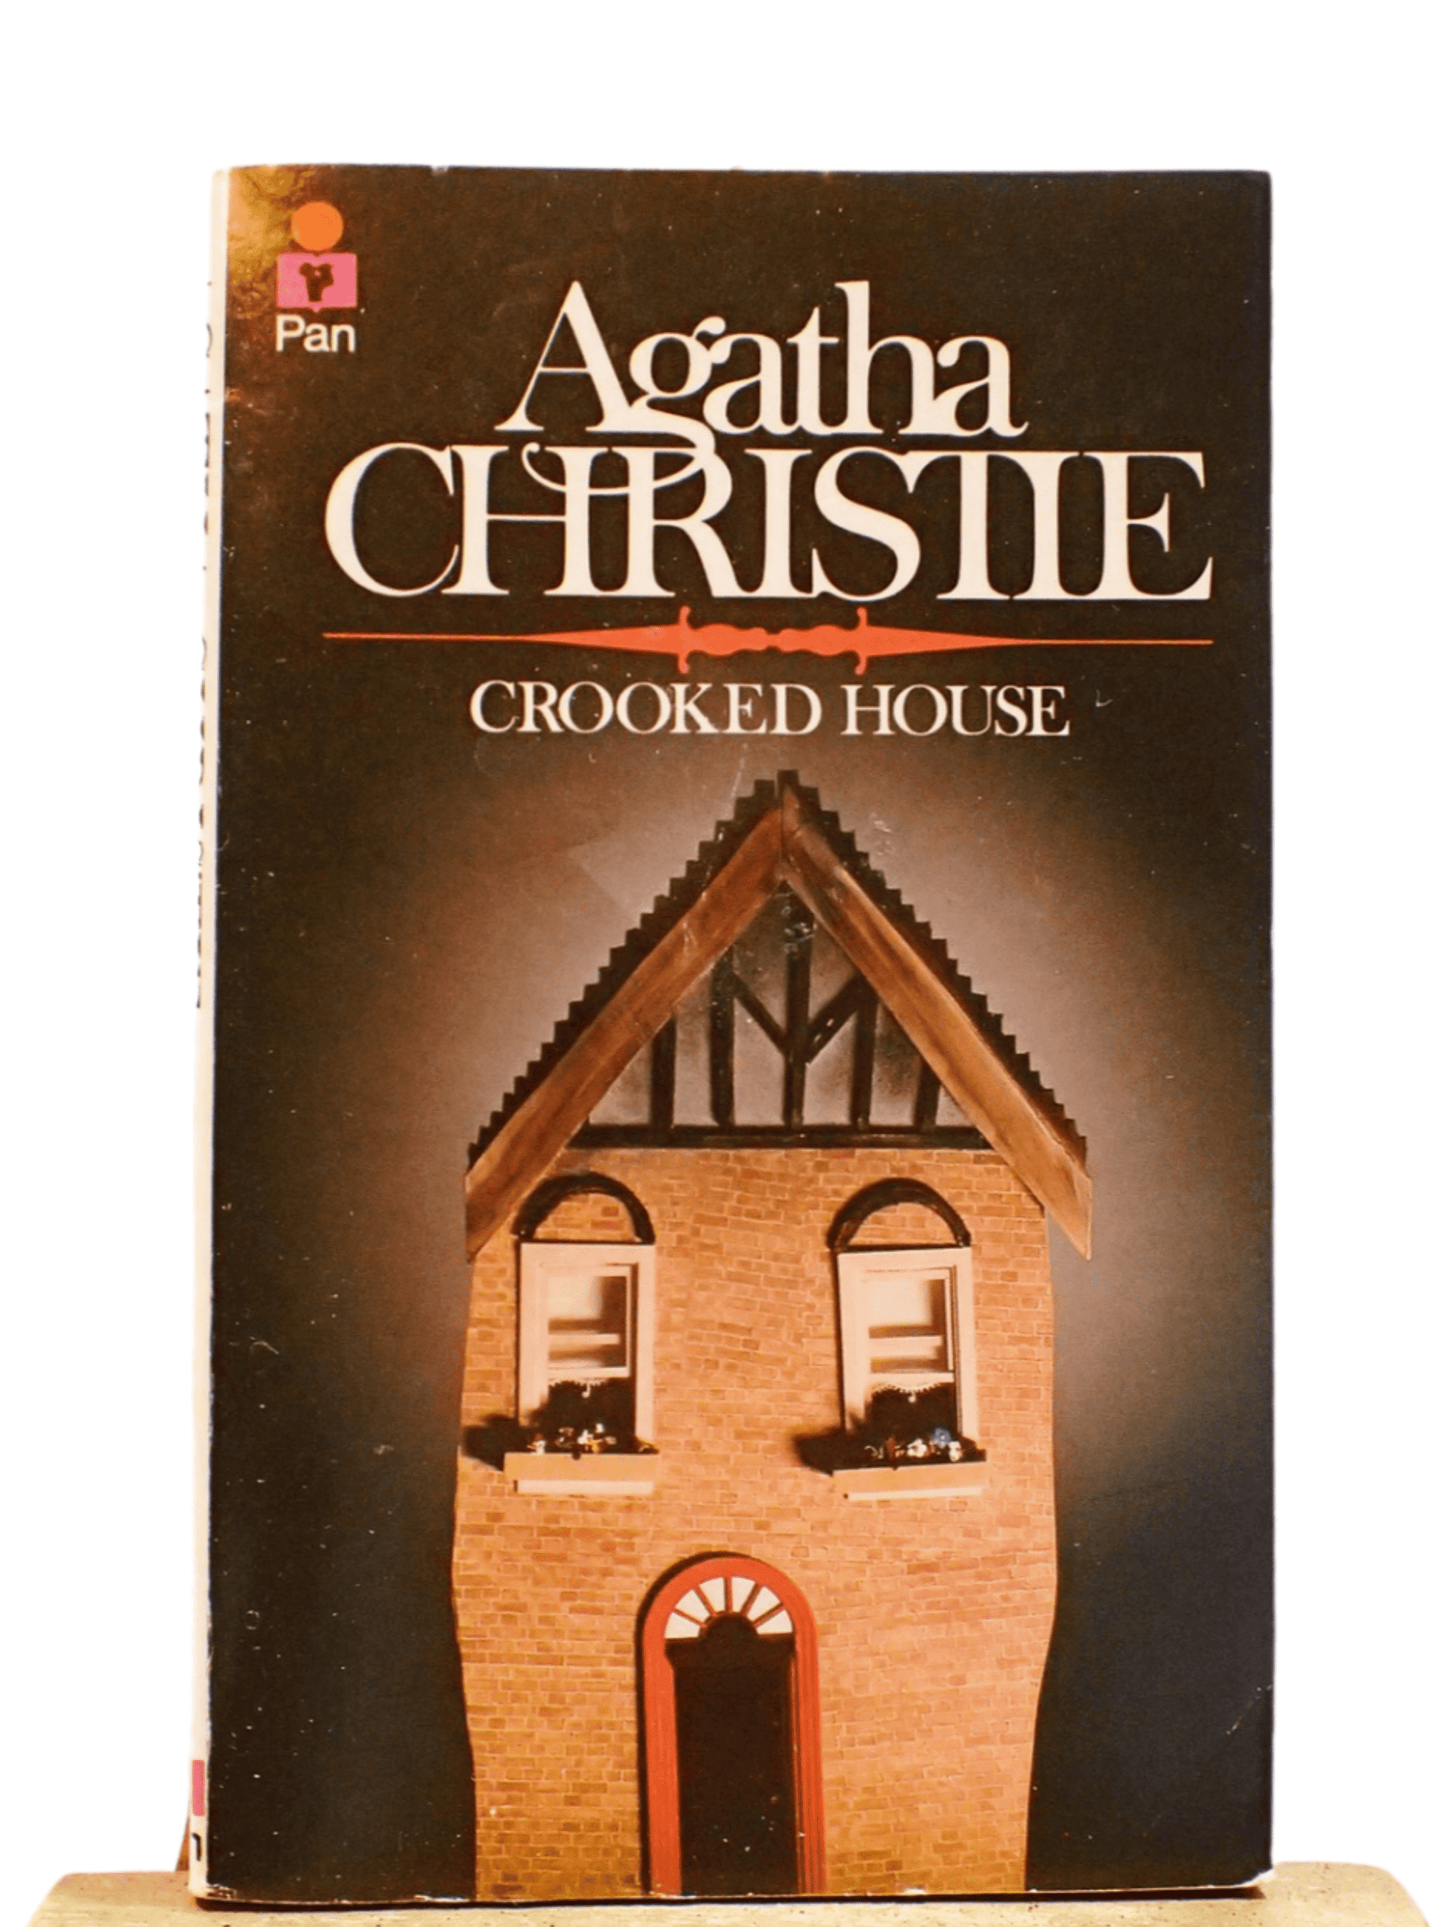 Crooked House Agatha Christie Classic Vintage Crime Book Pan Paperback 1985